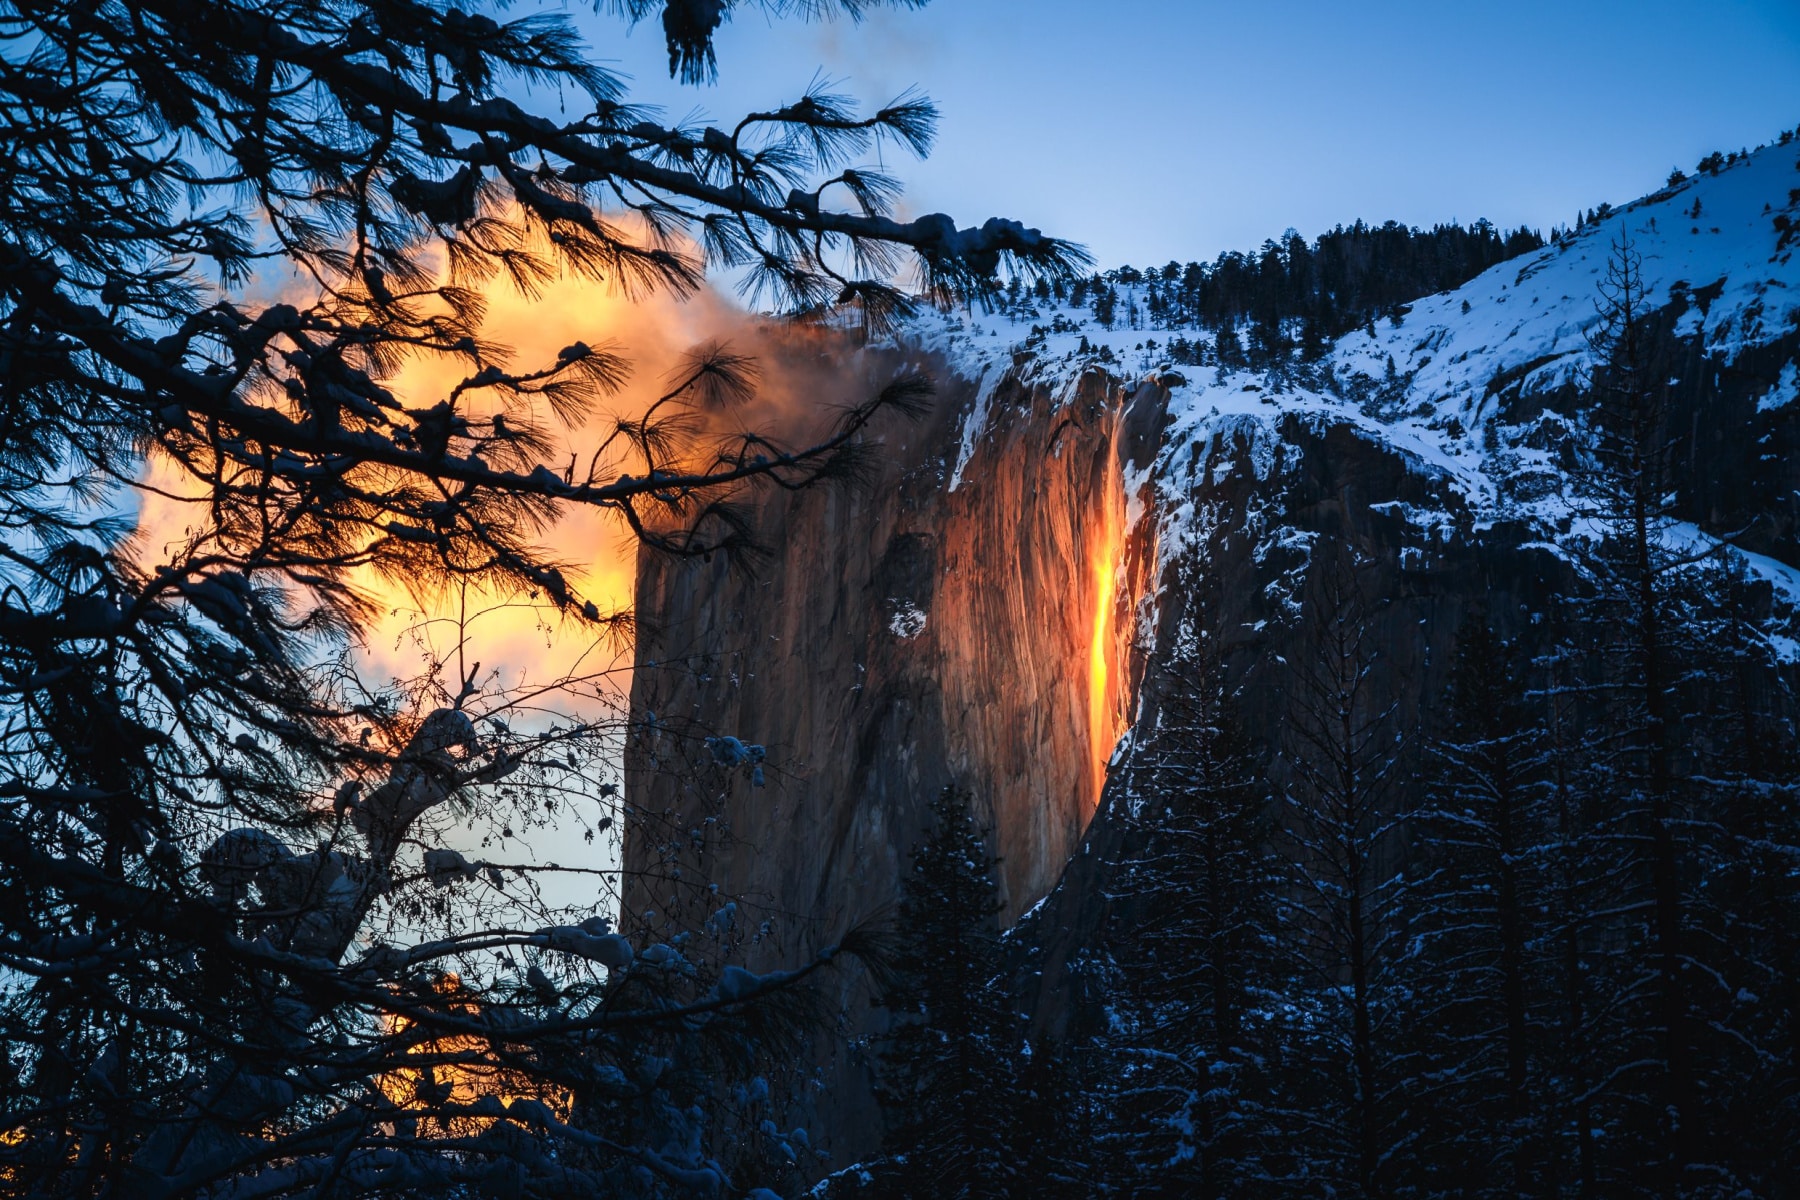 Yosemite Firefall seen from a distance with fog also glowing orange.